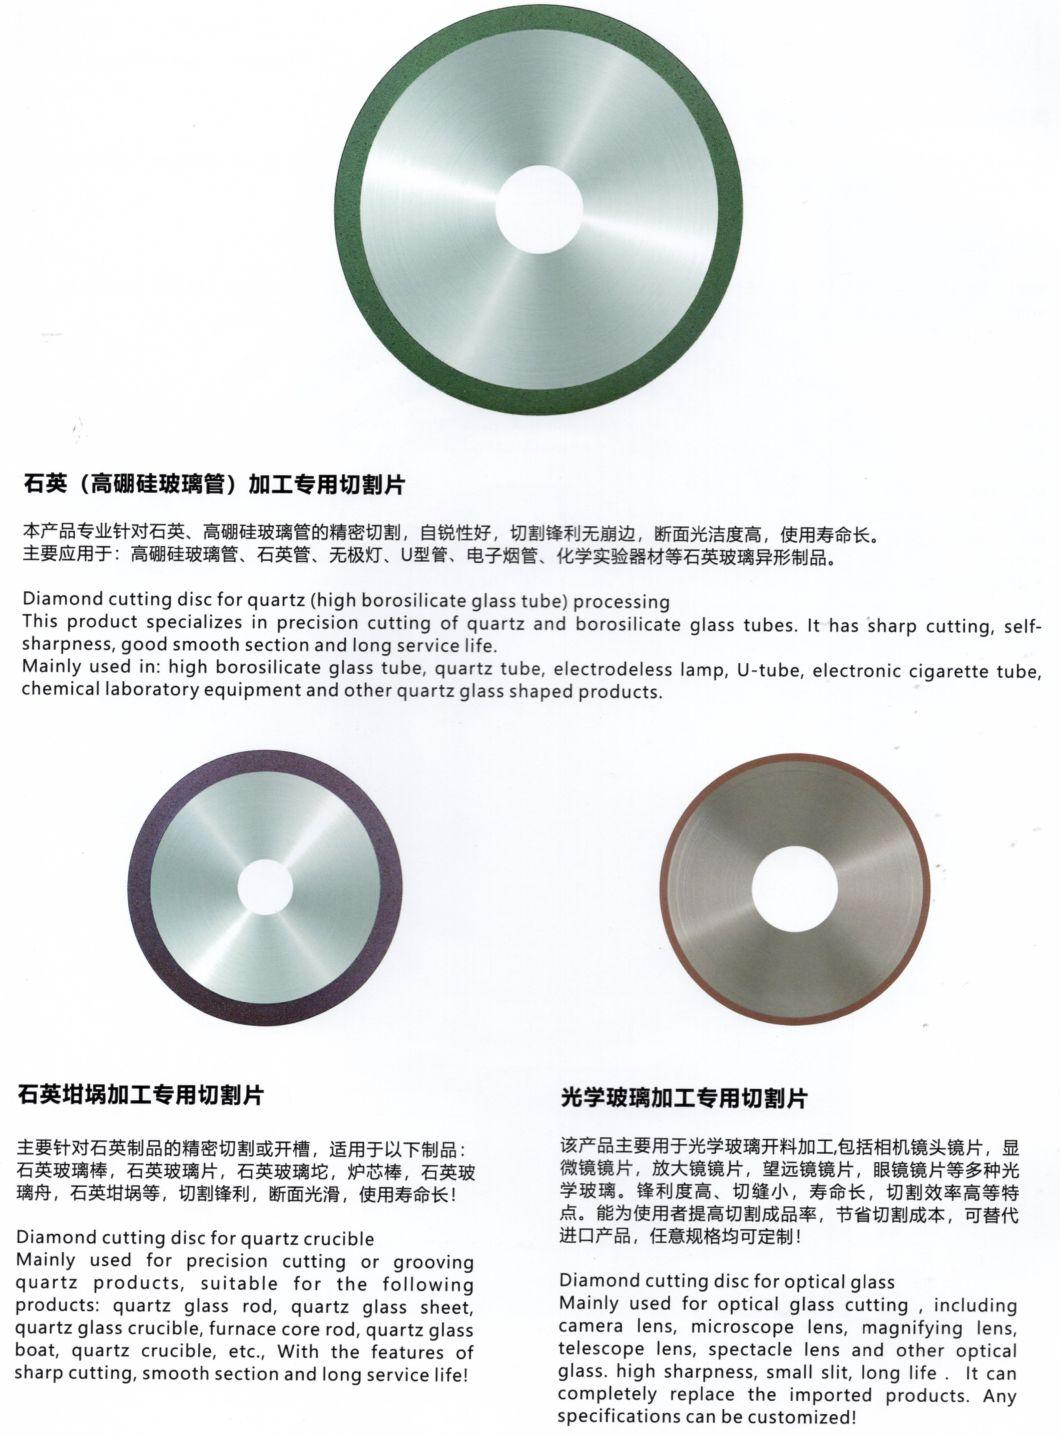 Metal Bonded Diamond Cutting Disc for Superfinishing Sonte